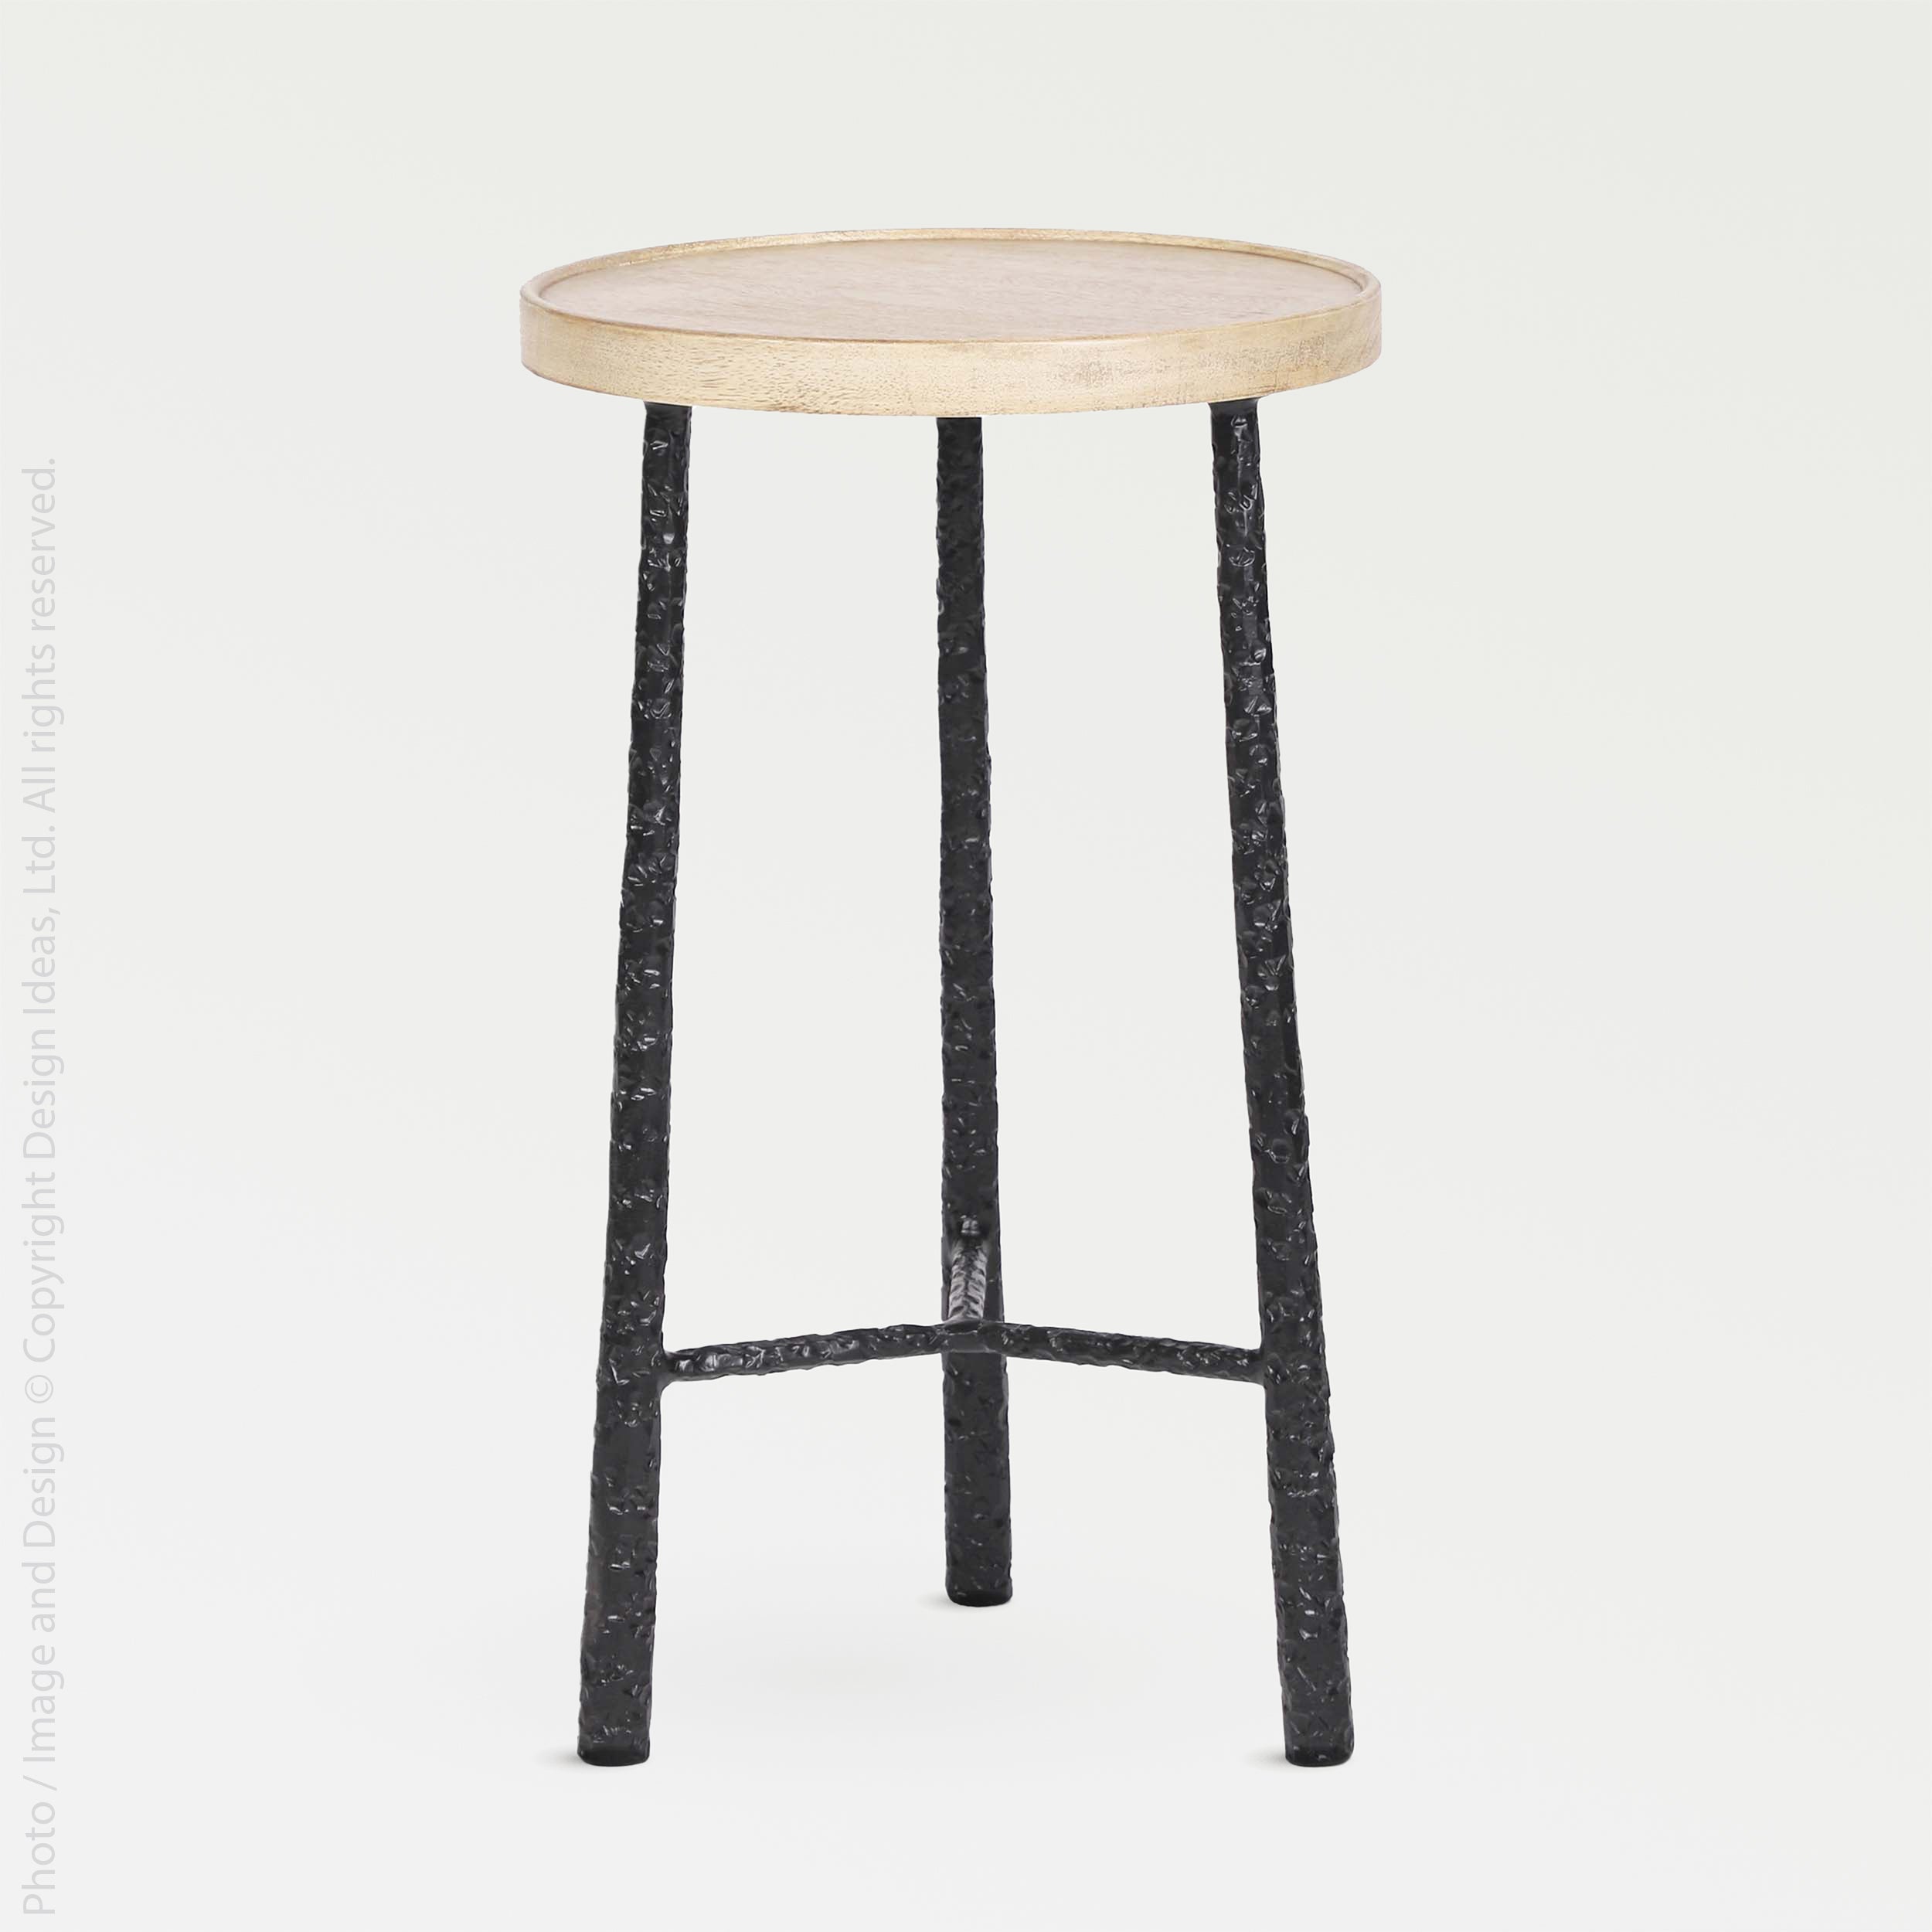 Valea™ round side table - Natural | Image 1 | Premium Table from the Valea collection | made with Mango Wood for long lasting use | texxture